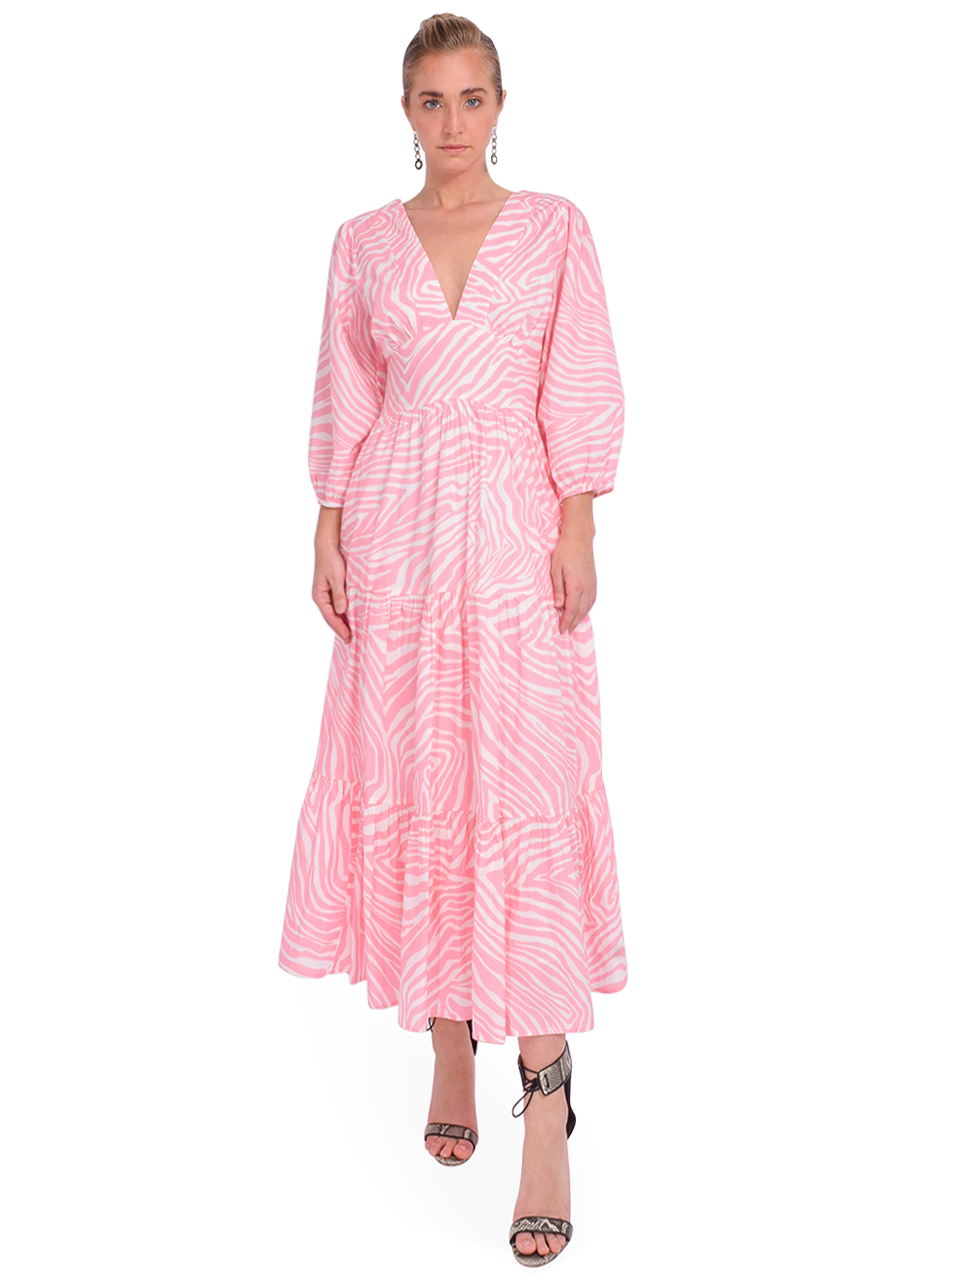 LOVE THE LABEL Elise Dress in Pink Zebra Alora Front View 1